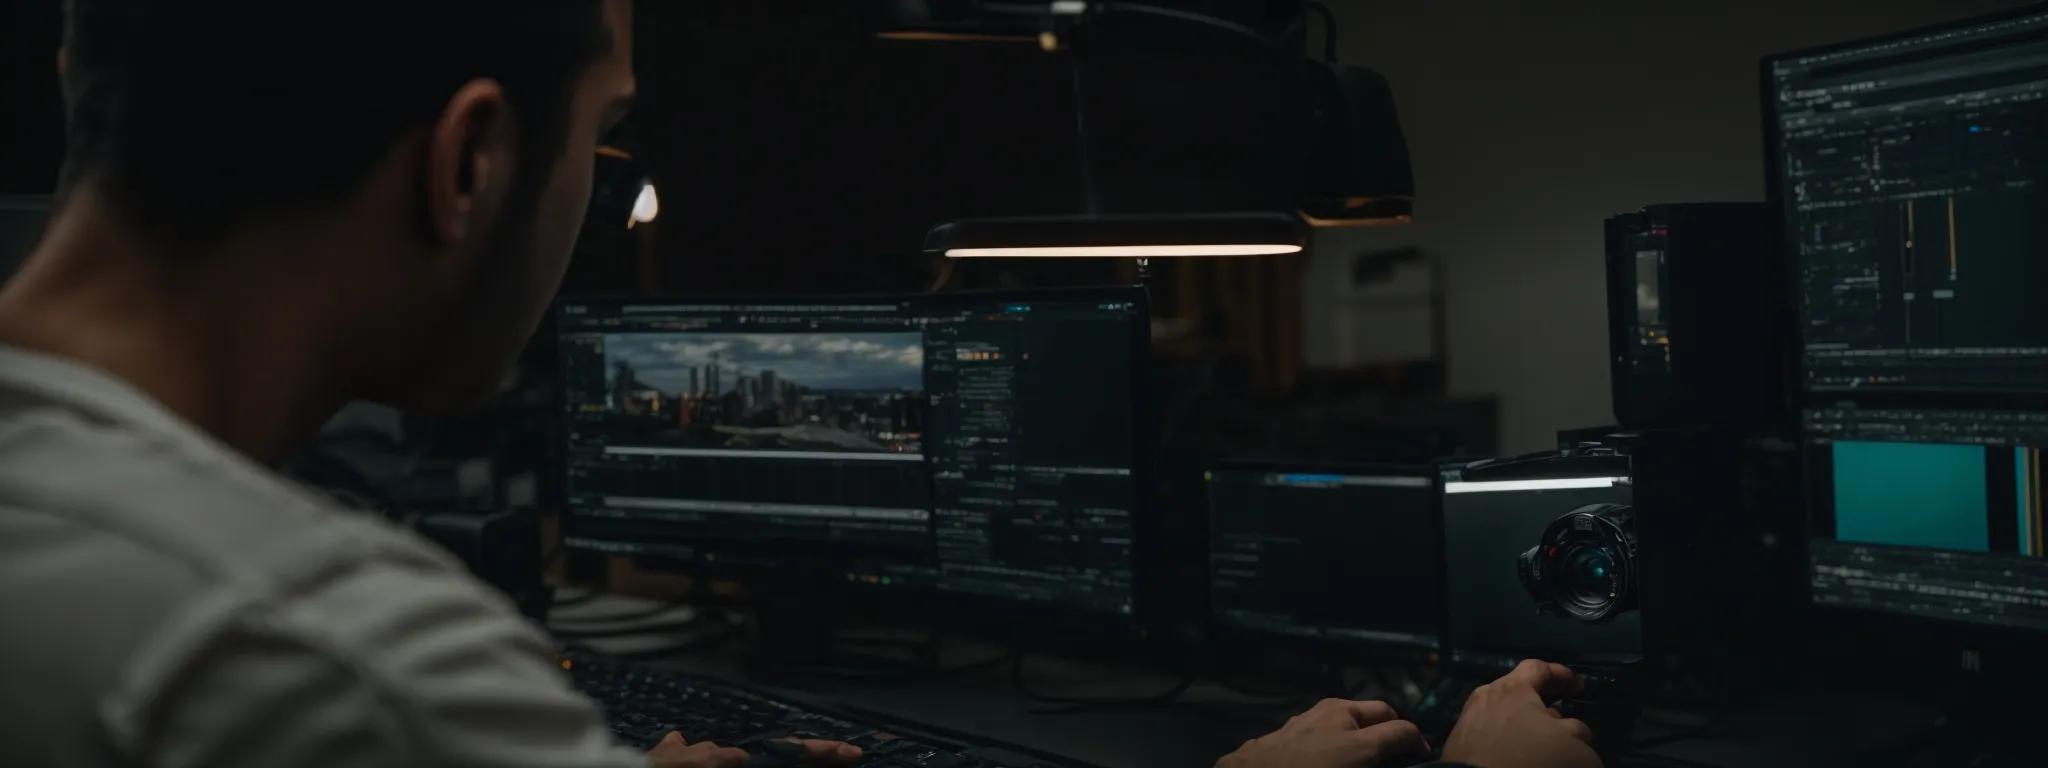 a camera focuses on a creative director editing a high-quality video on a professional workstation.